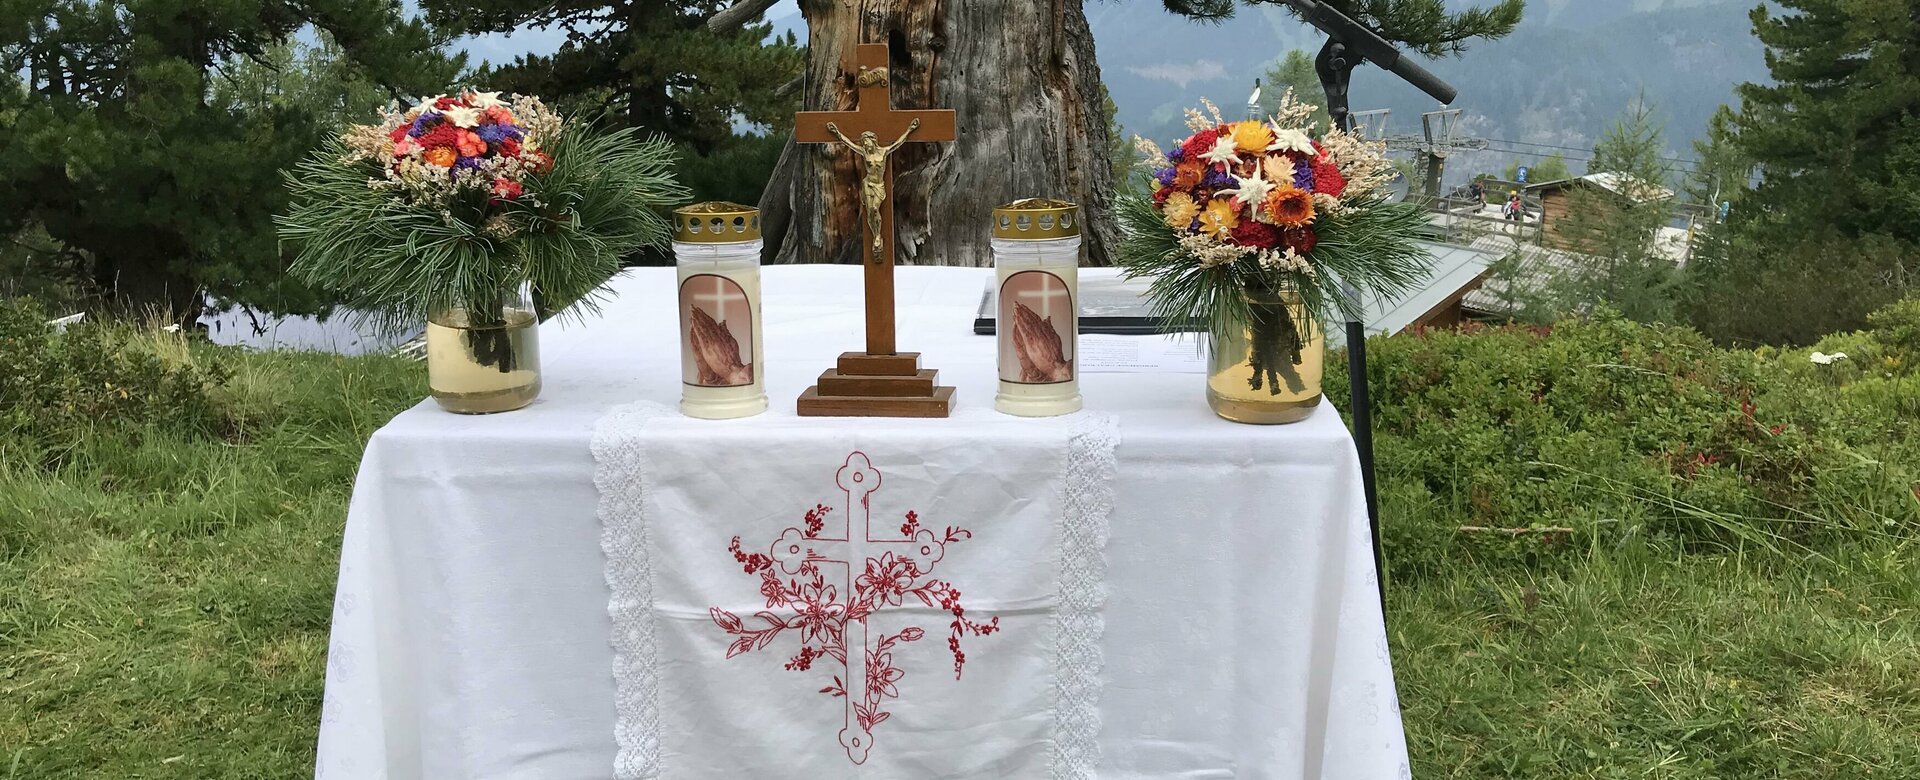 Altar decorated with flowers for the mountain mass on Graukogel | © gasteintourismusgmbh